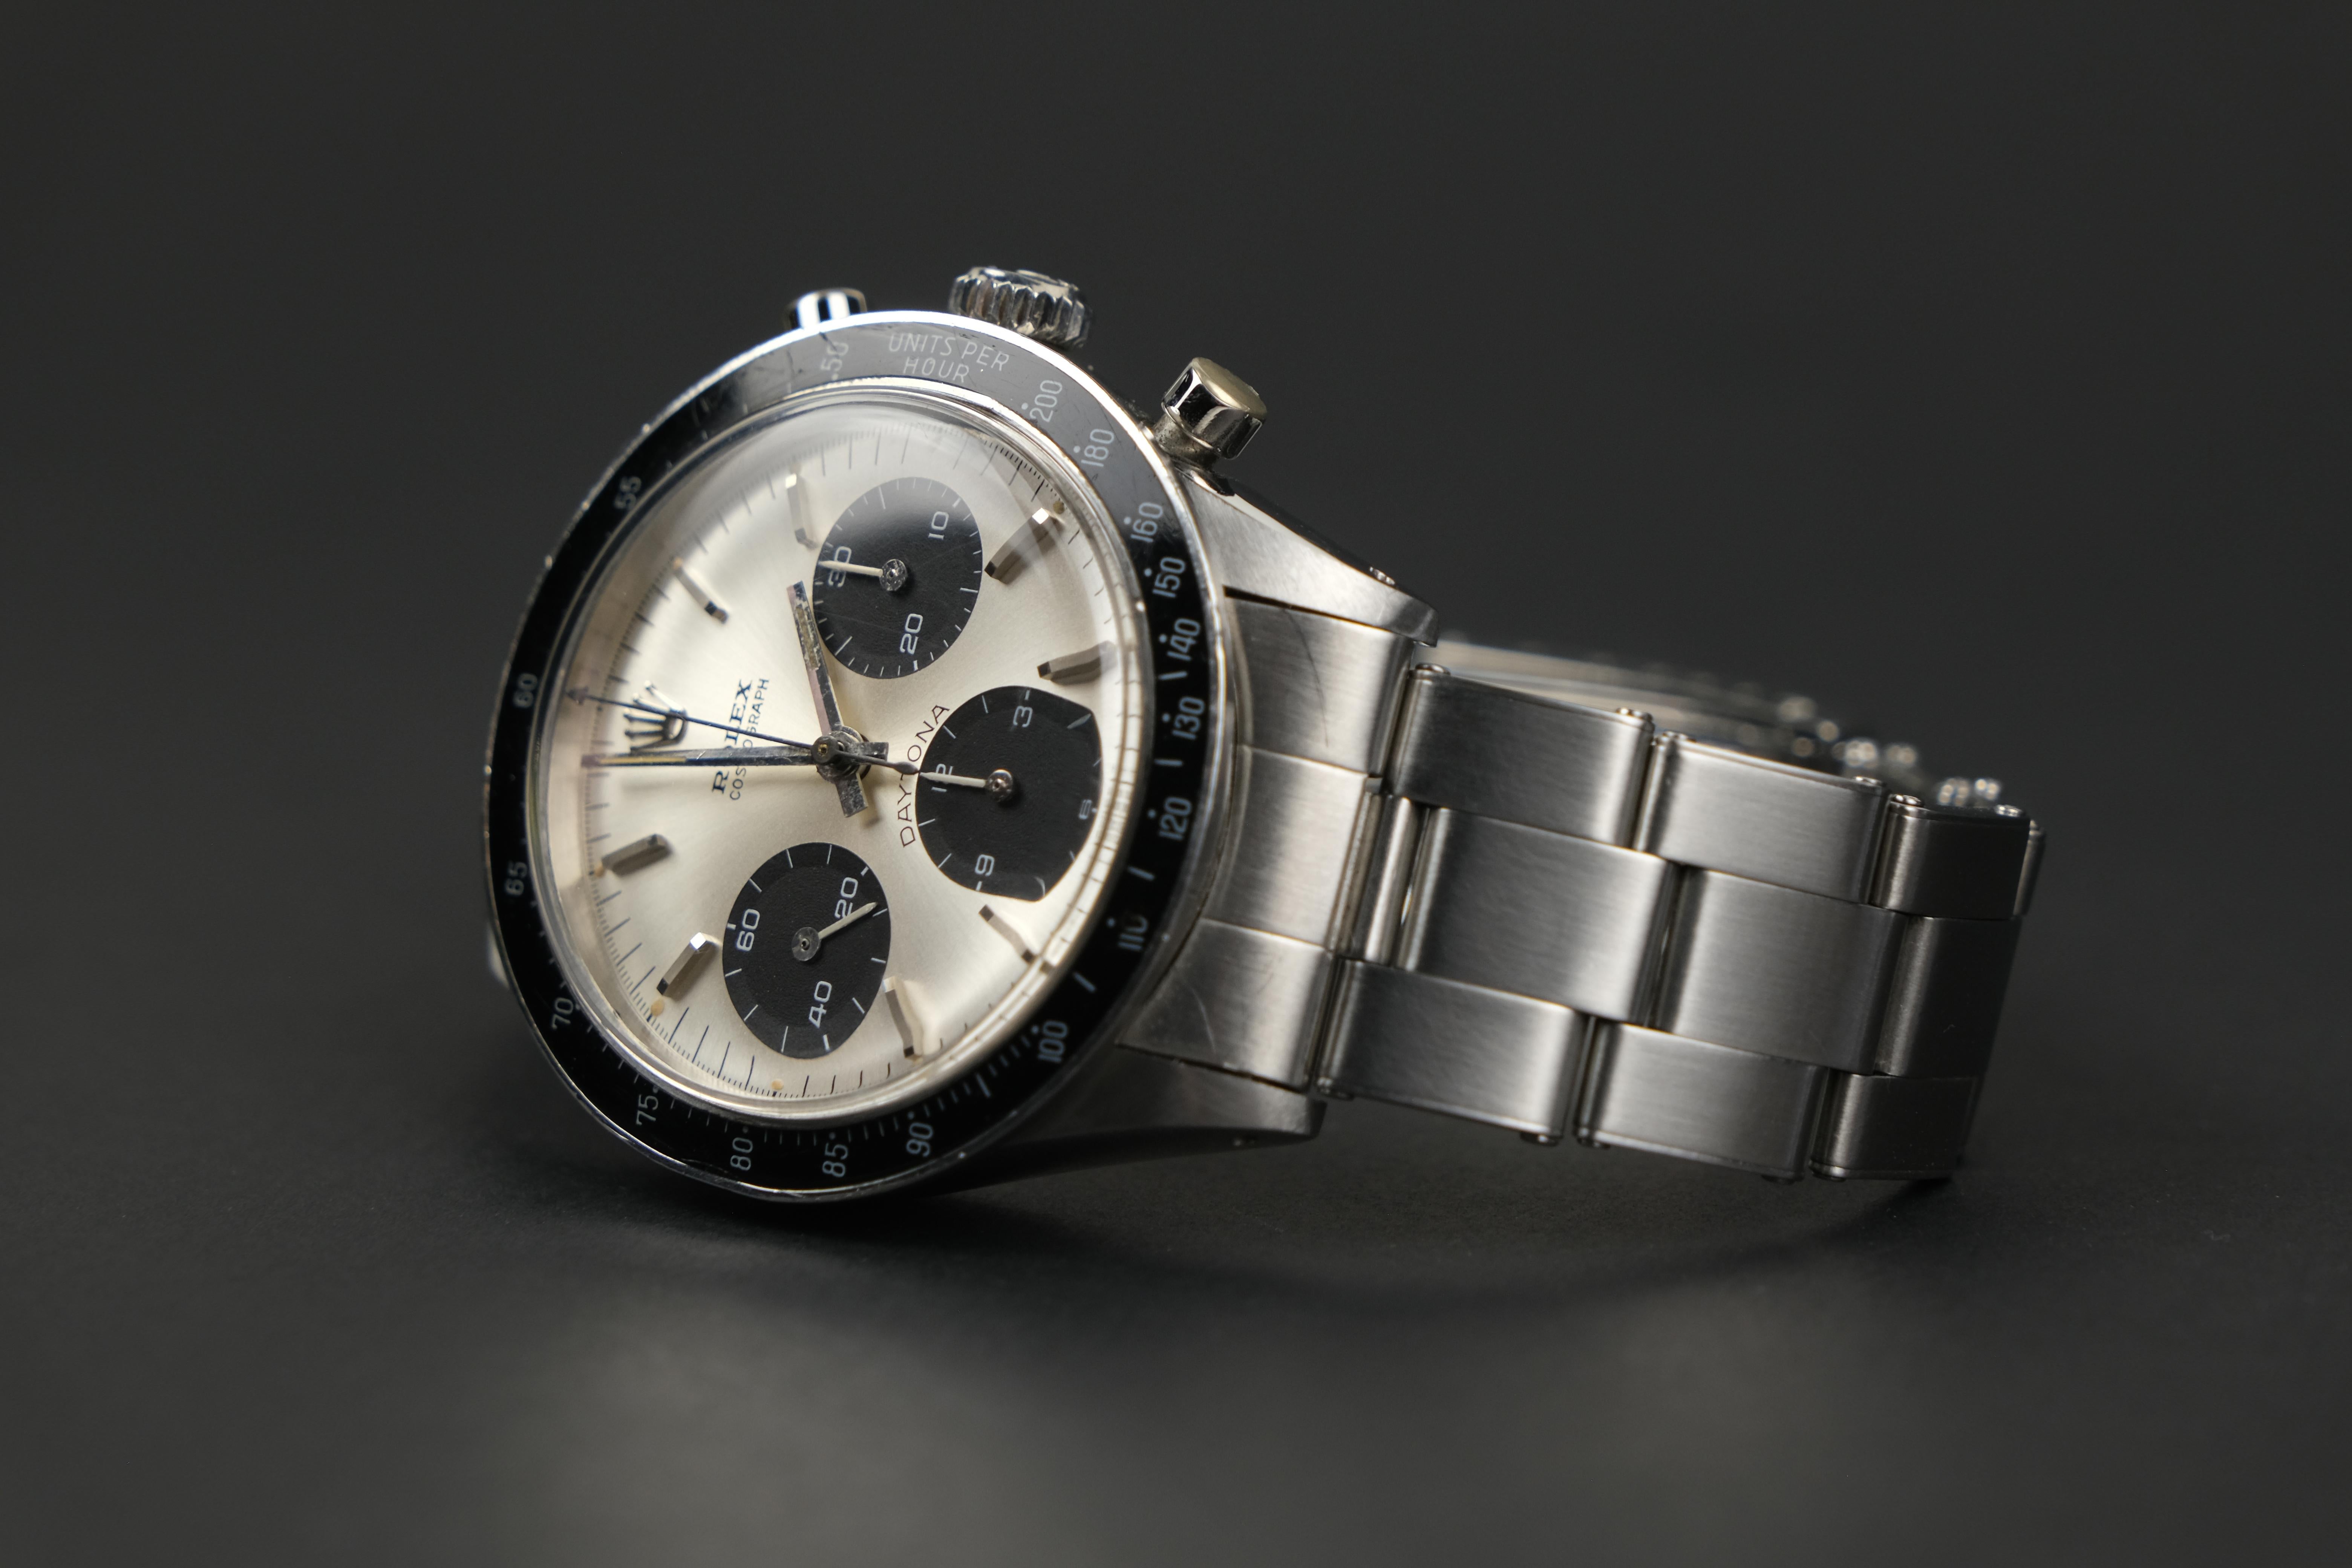 1968 Rolex Cosmograph Daytona 6241 Stainless Steel Stem Wind Wristwatch In Good Condition For Sale In Bradford, Ontario